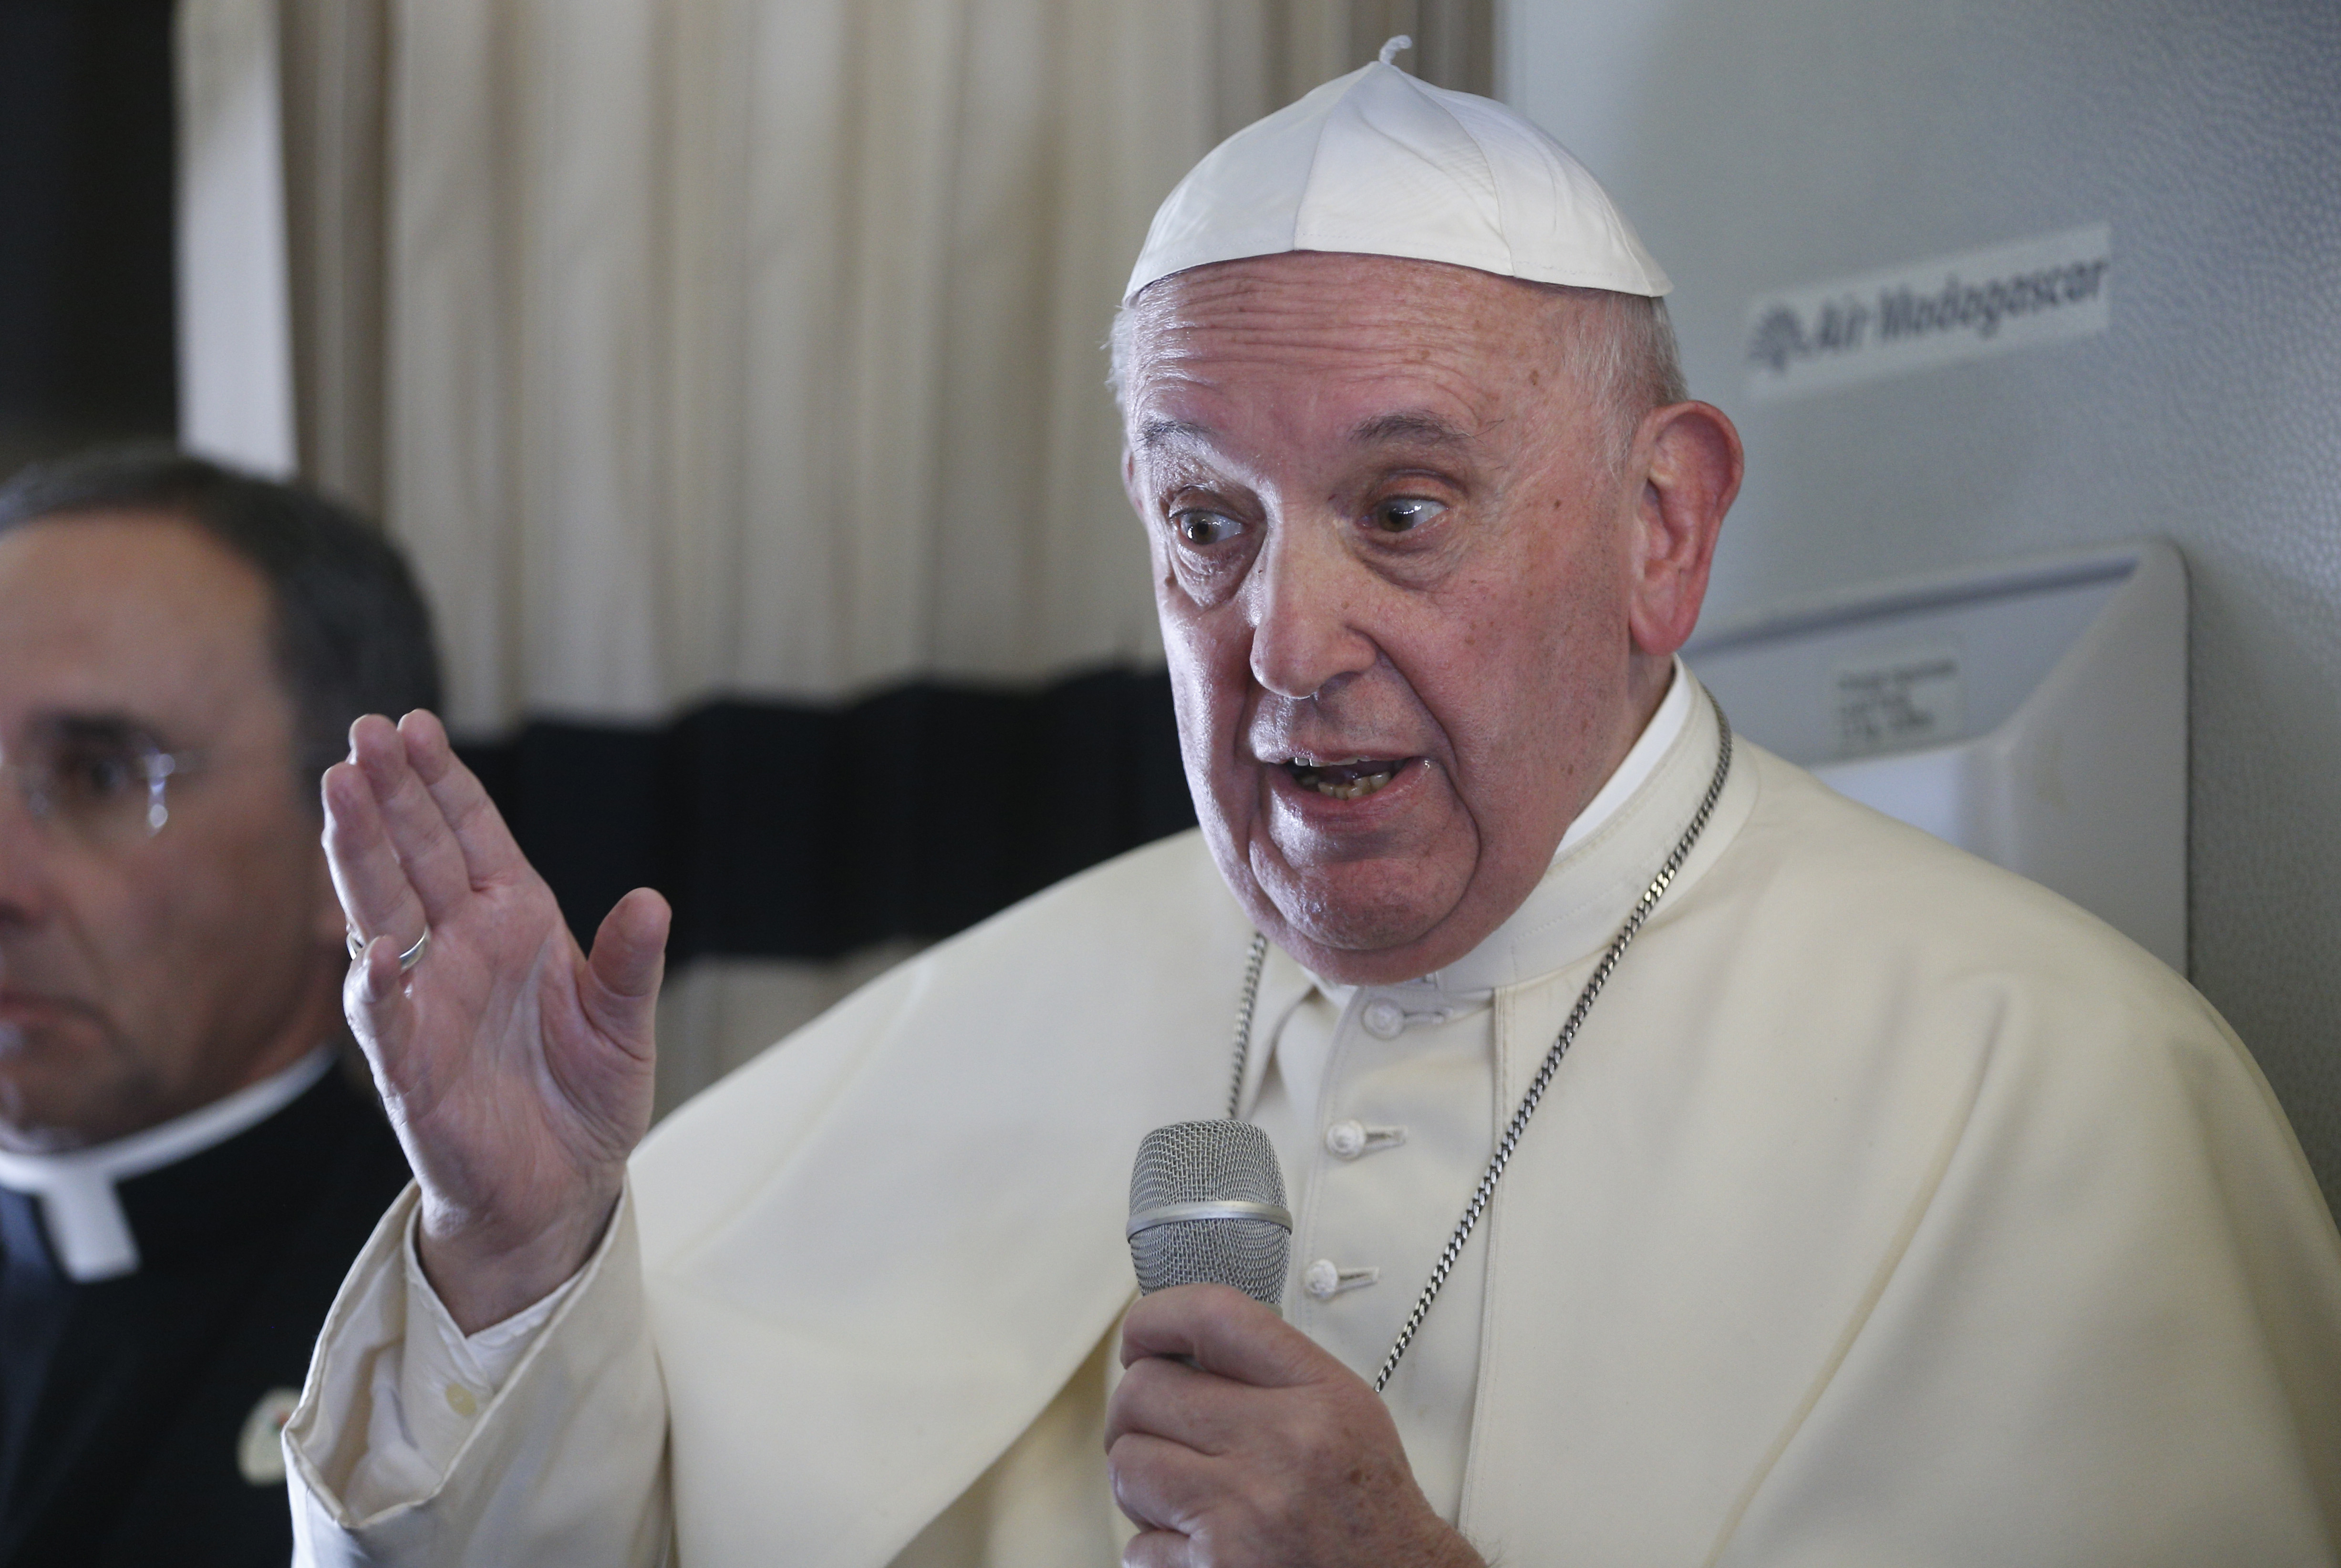 Ideological fixation, not 'loyal criticism,' feeds possibility of schism, pope says